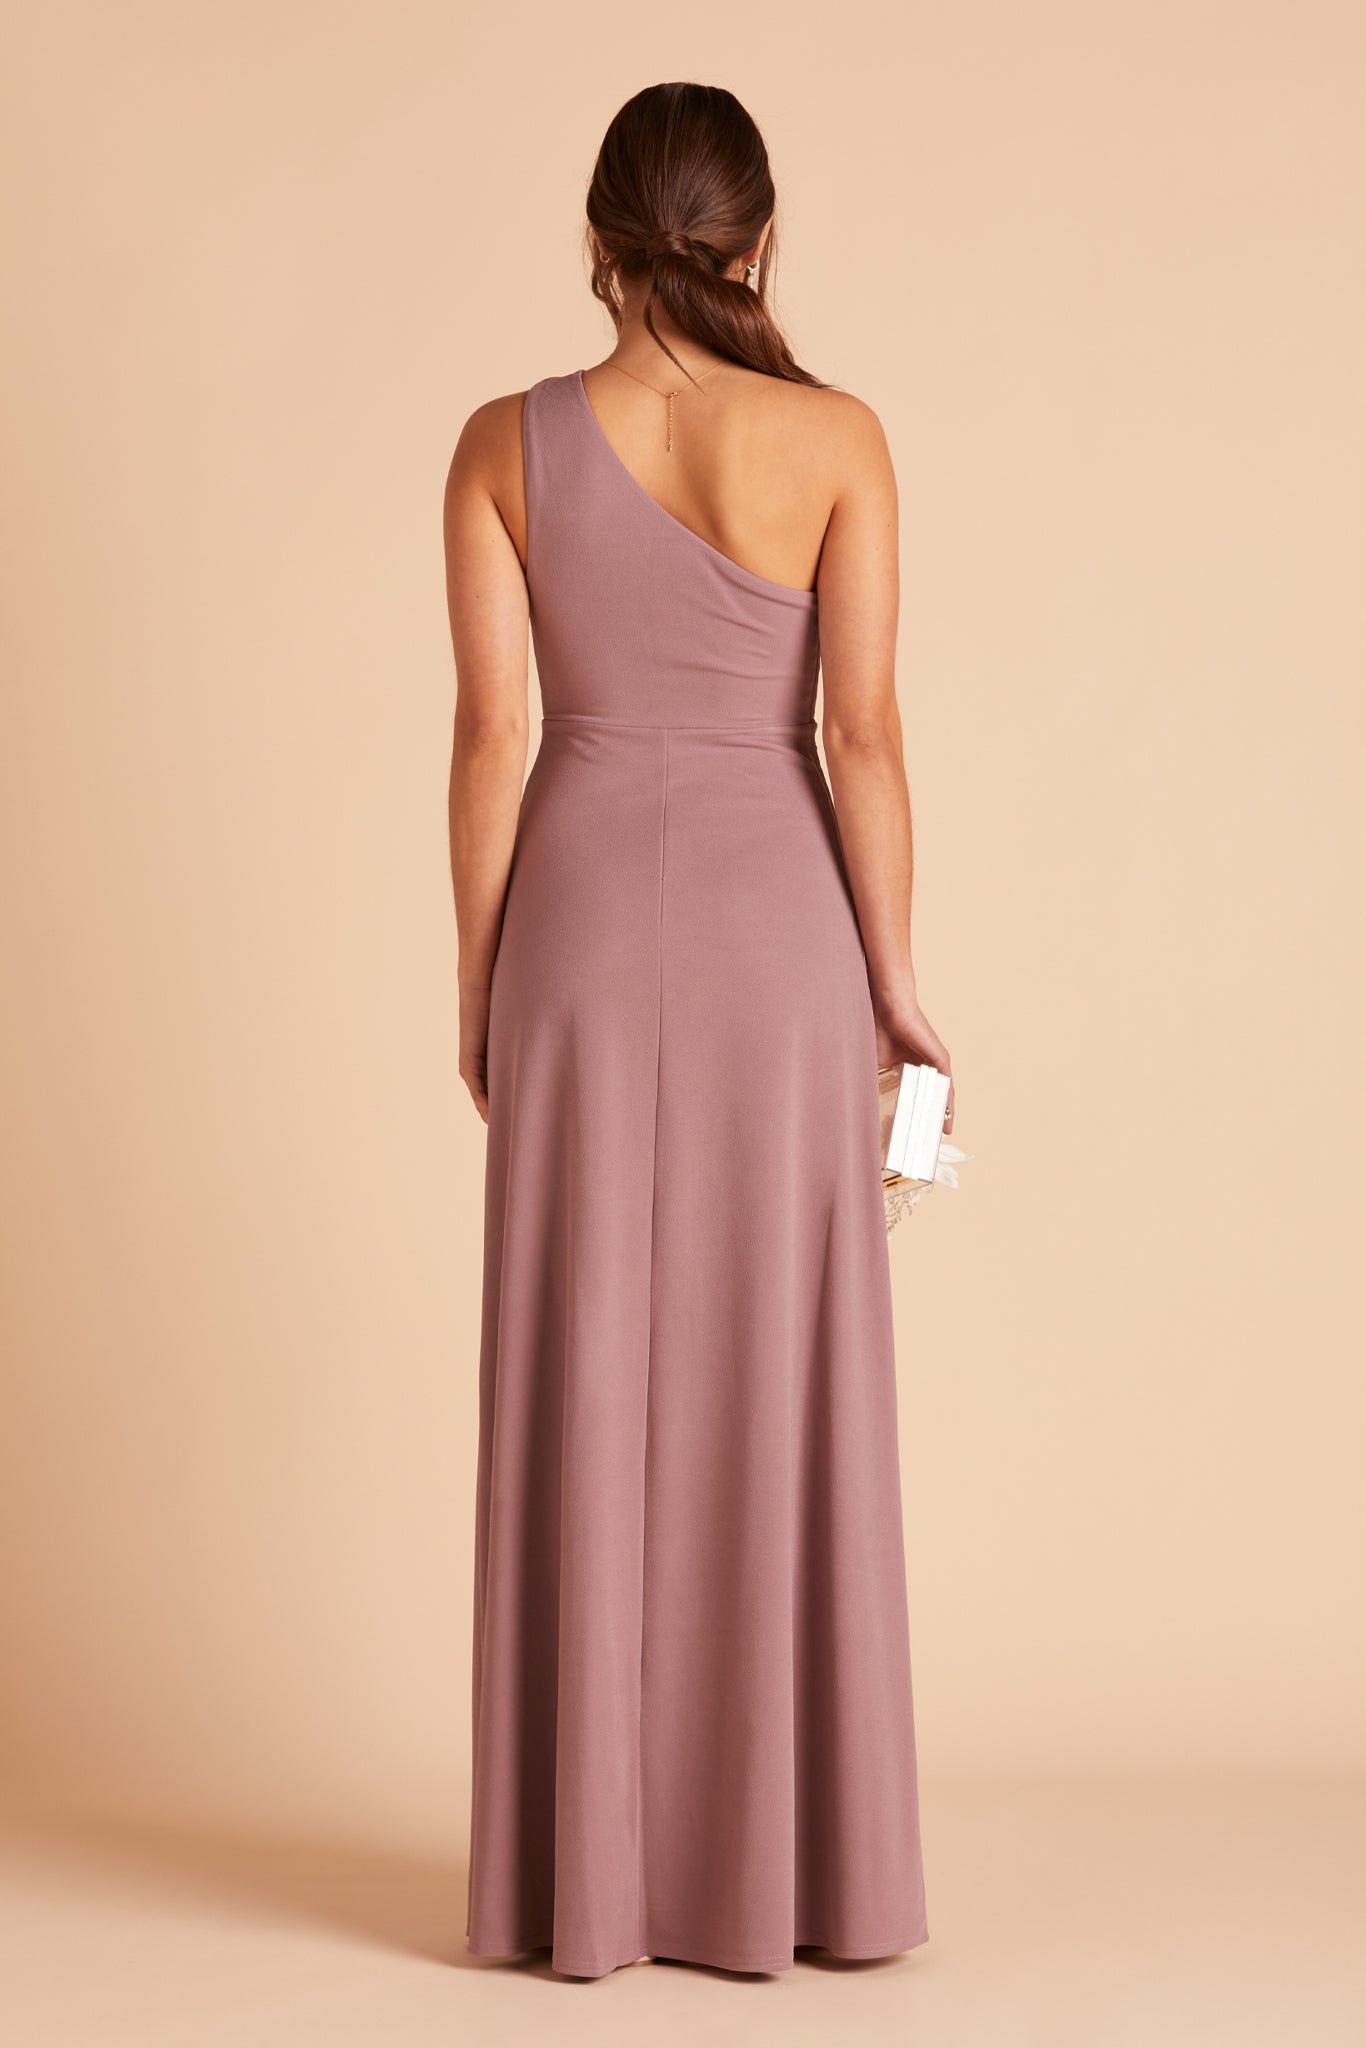 Kira bridesmaid dress with slit in dark mauve crepe by Birdy Grey, back view